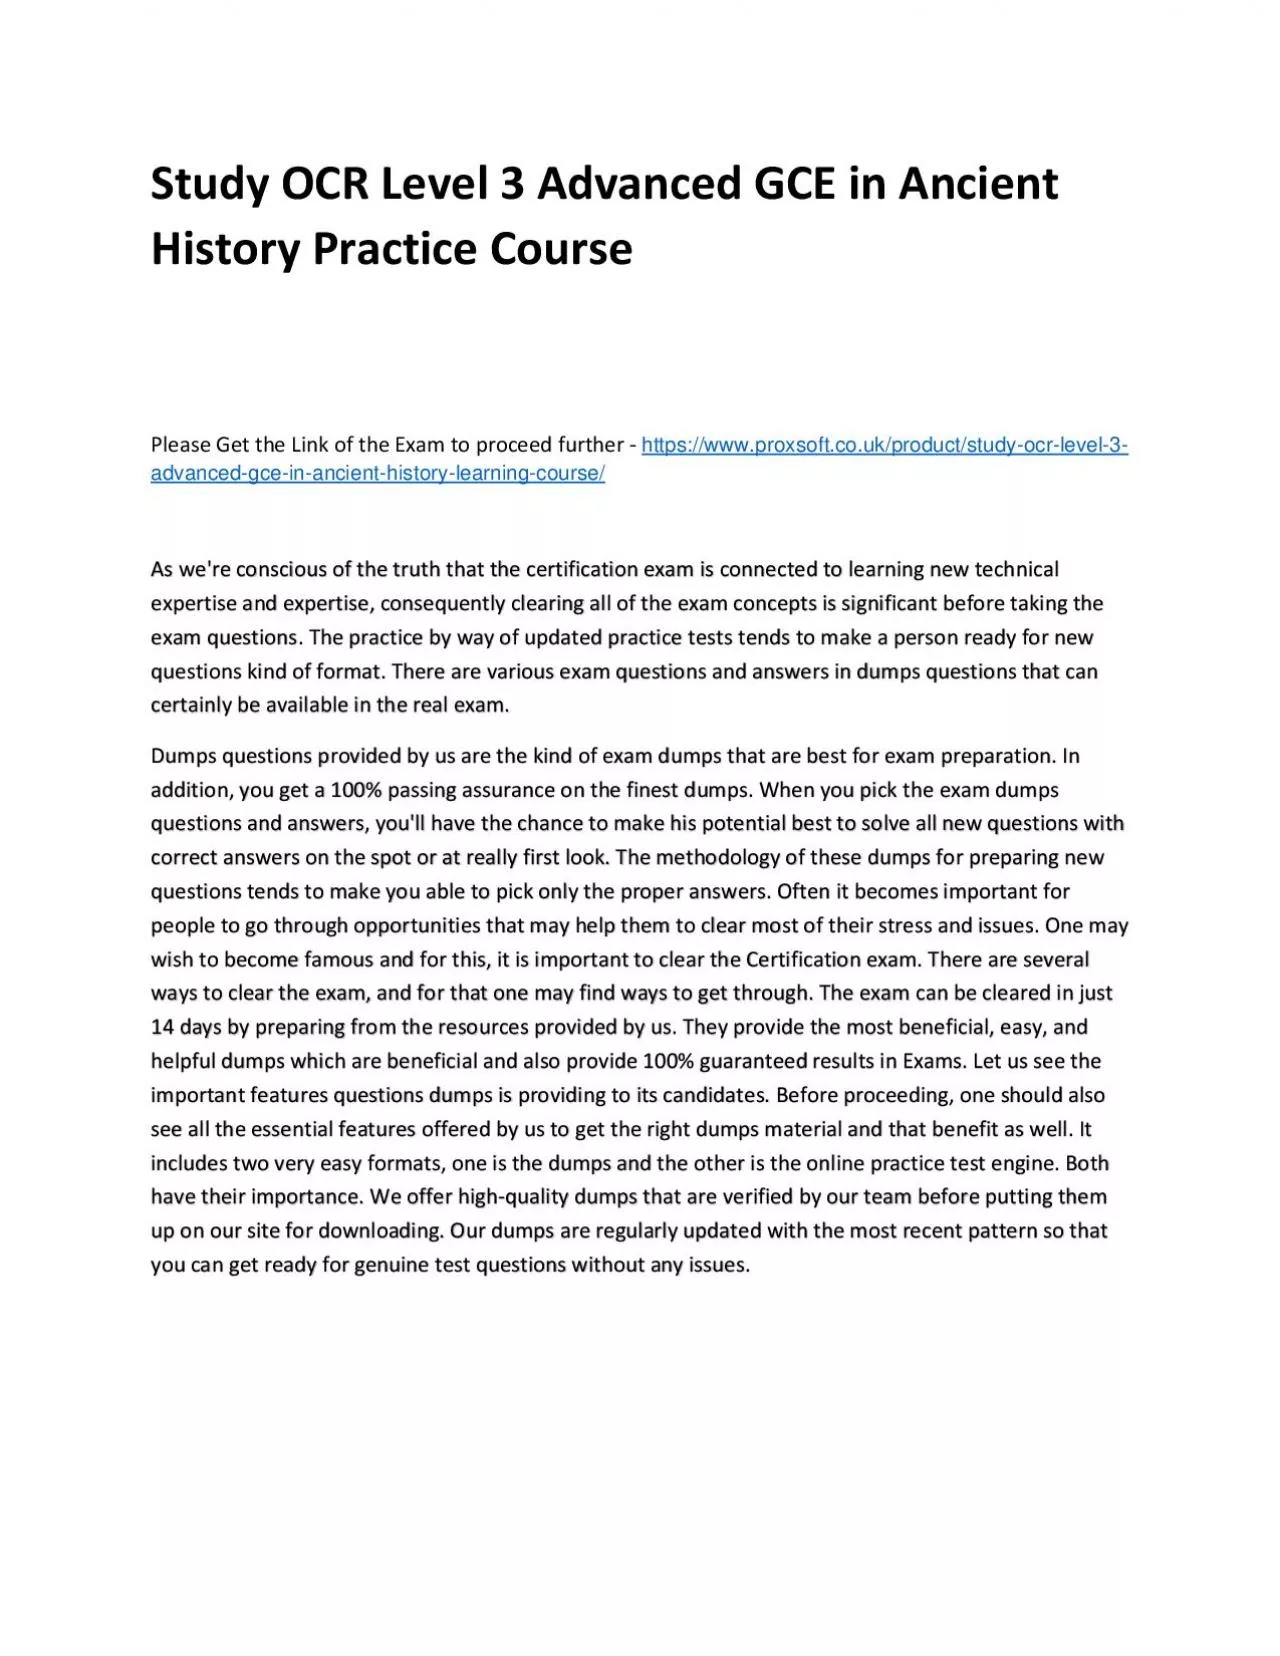 Study OCR Level 3 Advanced GCE in Ancient History Practice Course